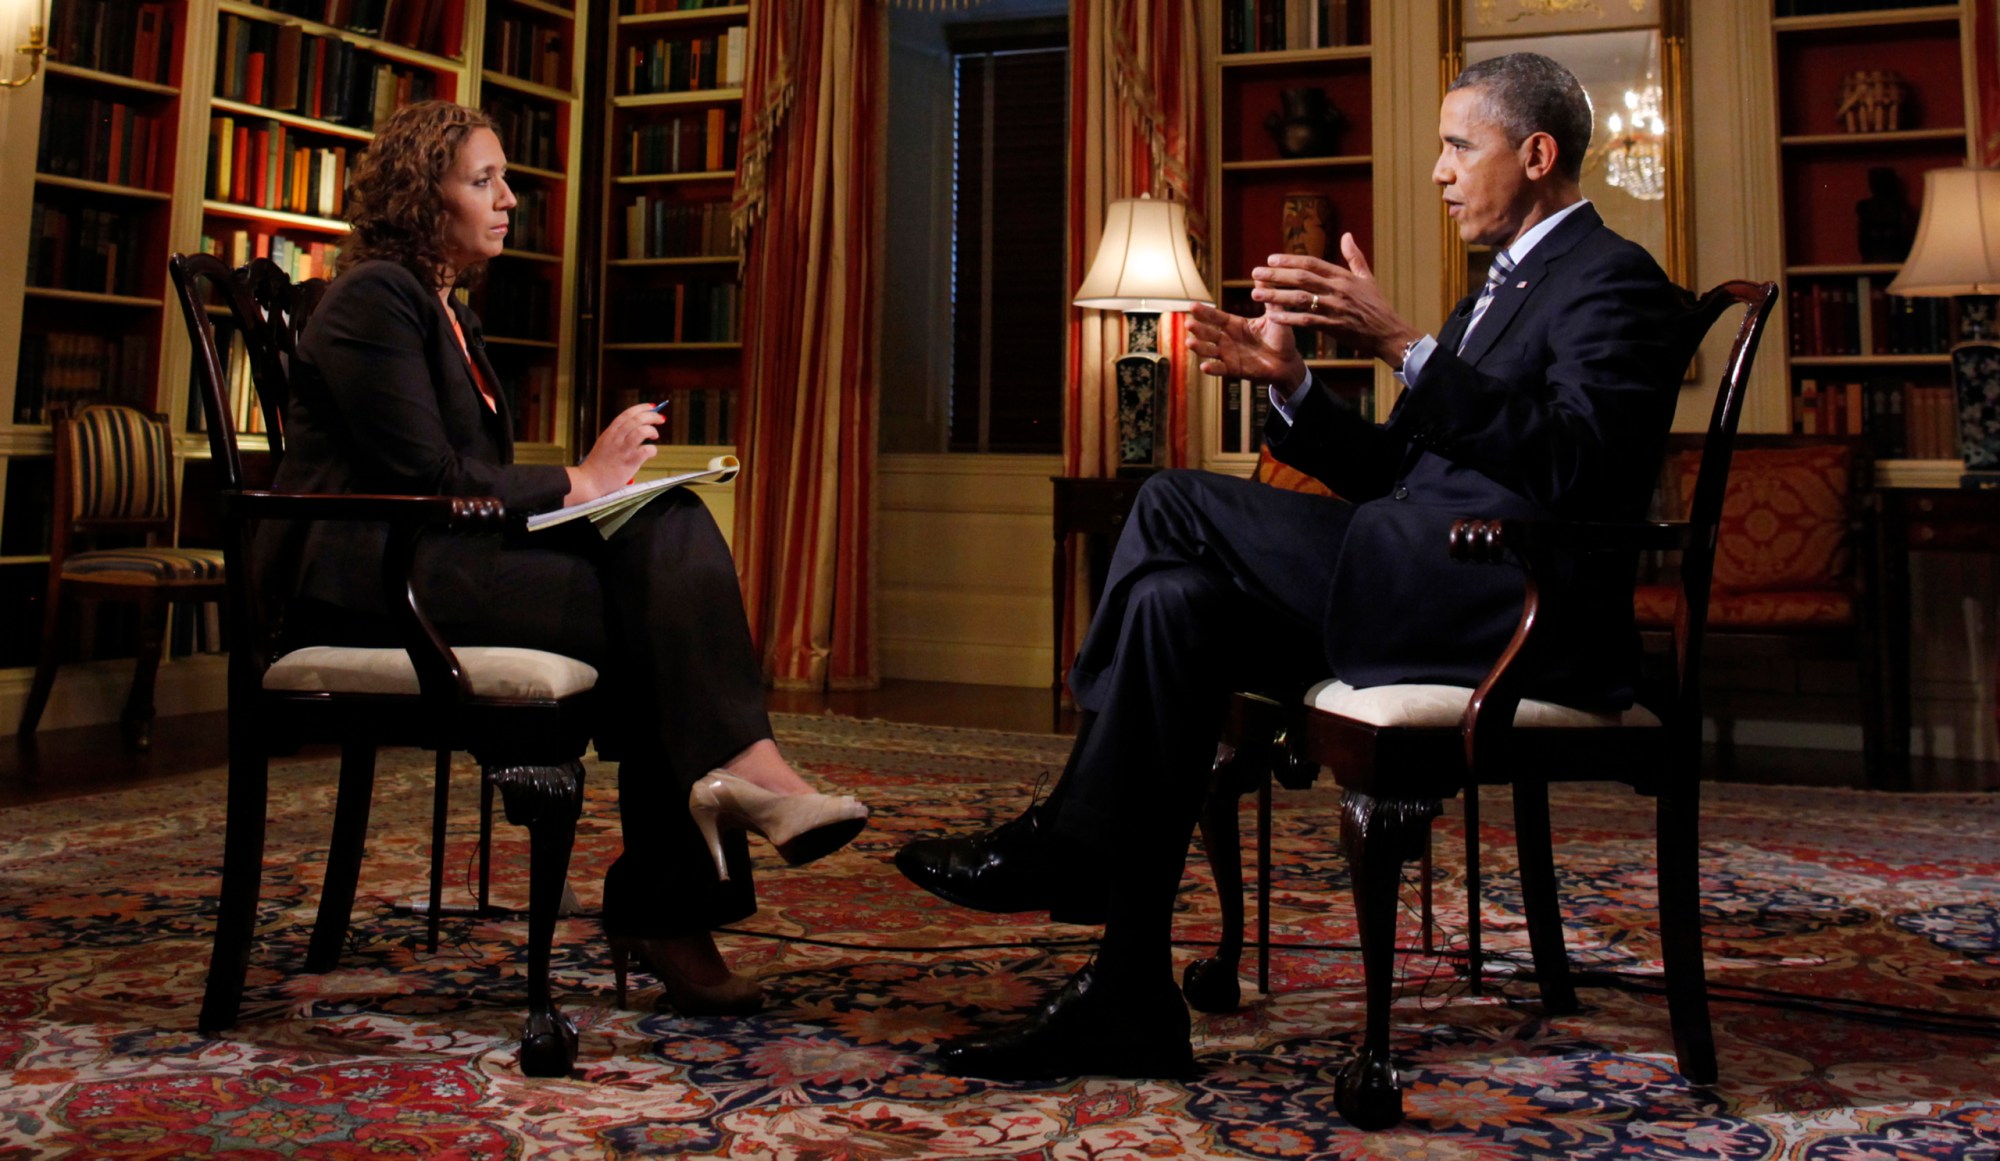 President Barack Obama speaks with a reporter during an interview in the White House library. (AP/Charles Dharapak)